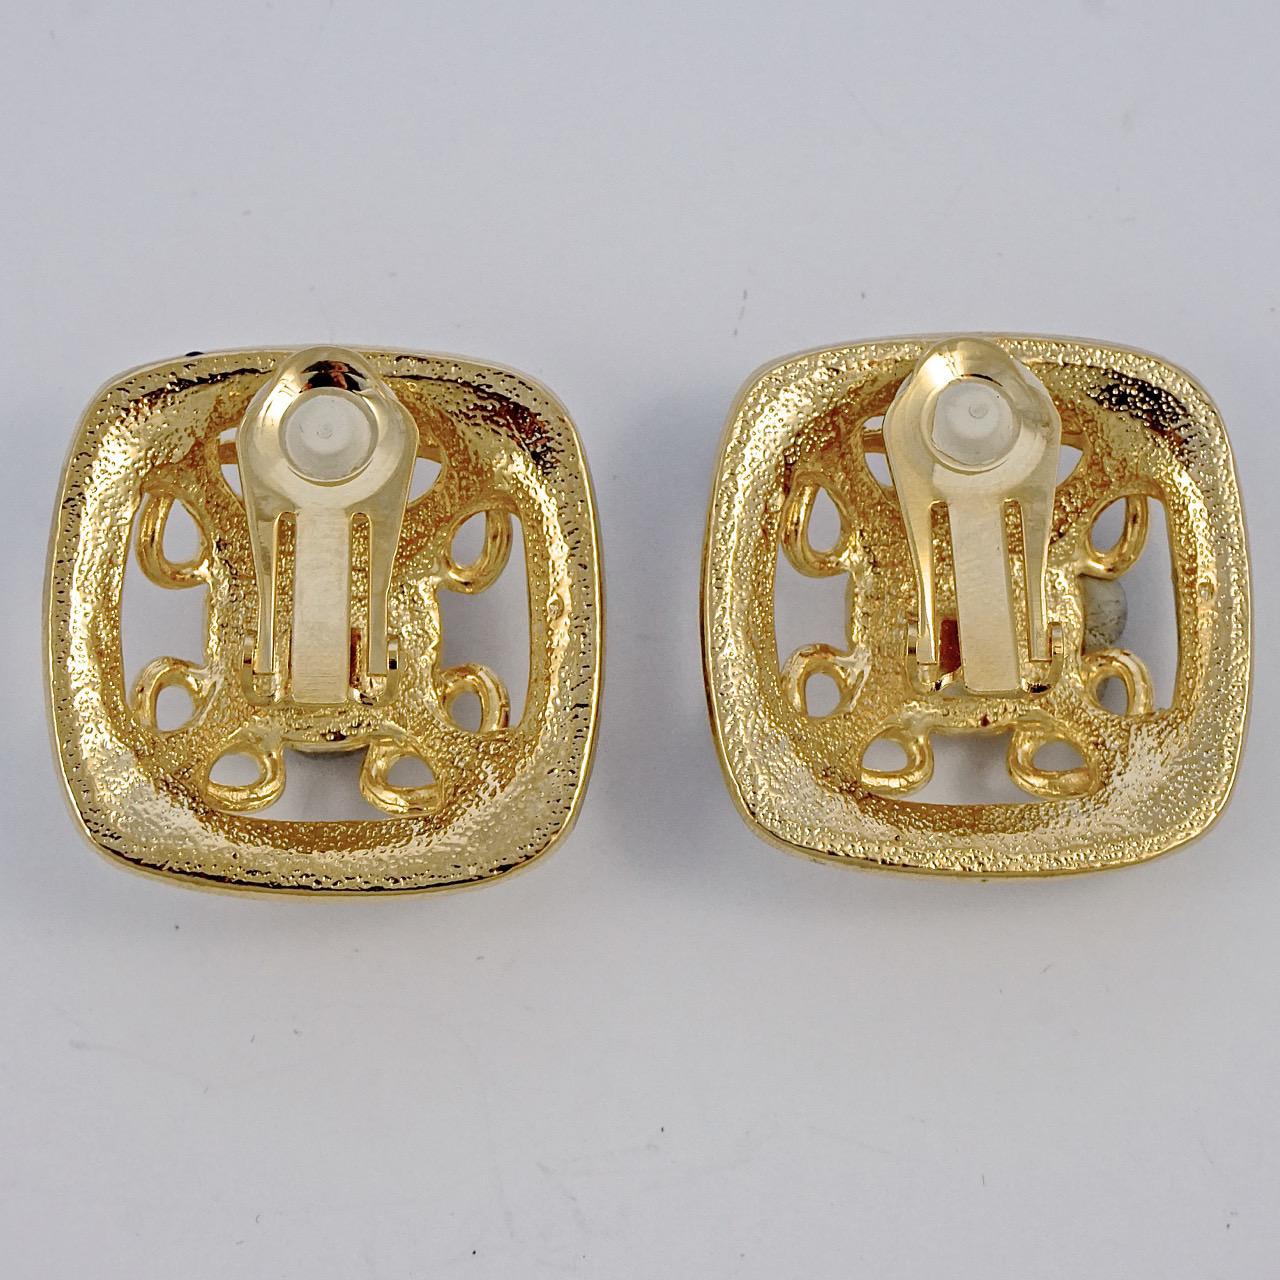 Gold plated clip on earrings with faux pearls and a lovely blue and green enamel edging. Measuring 3cm / 1.2 inches square. The earrings are in very good condition.

This is a pair of stylish vintage earrings from the 1980s.